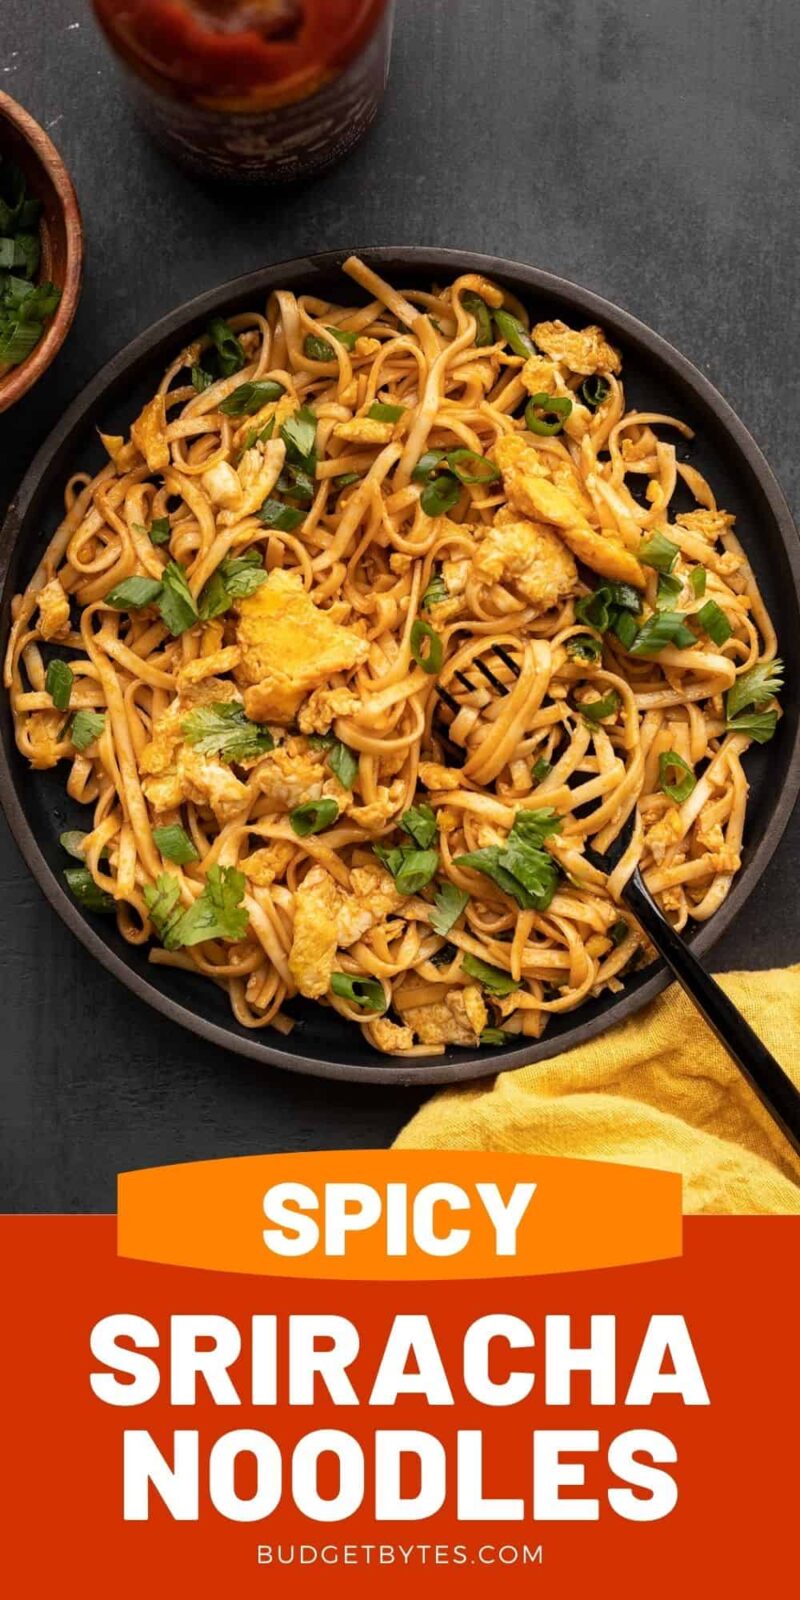 https://www.budgetbytes.com/wp-content/uploads/2012/08/Spicy-Noodles-PIN4-800x1600.jpg